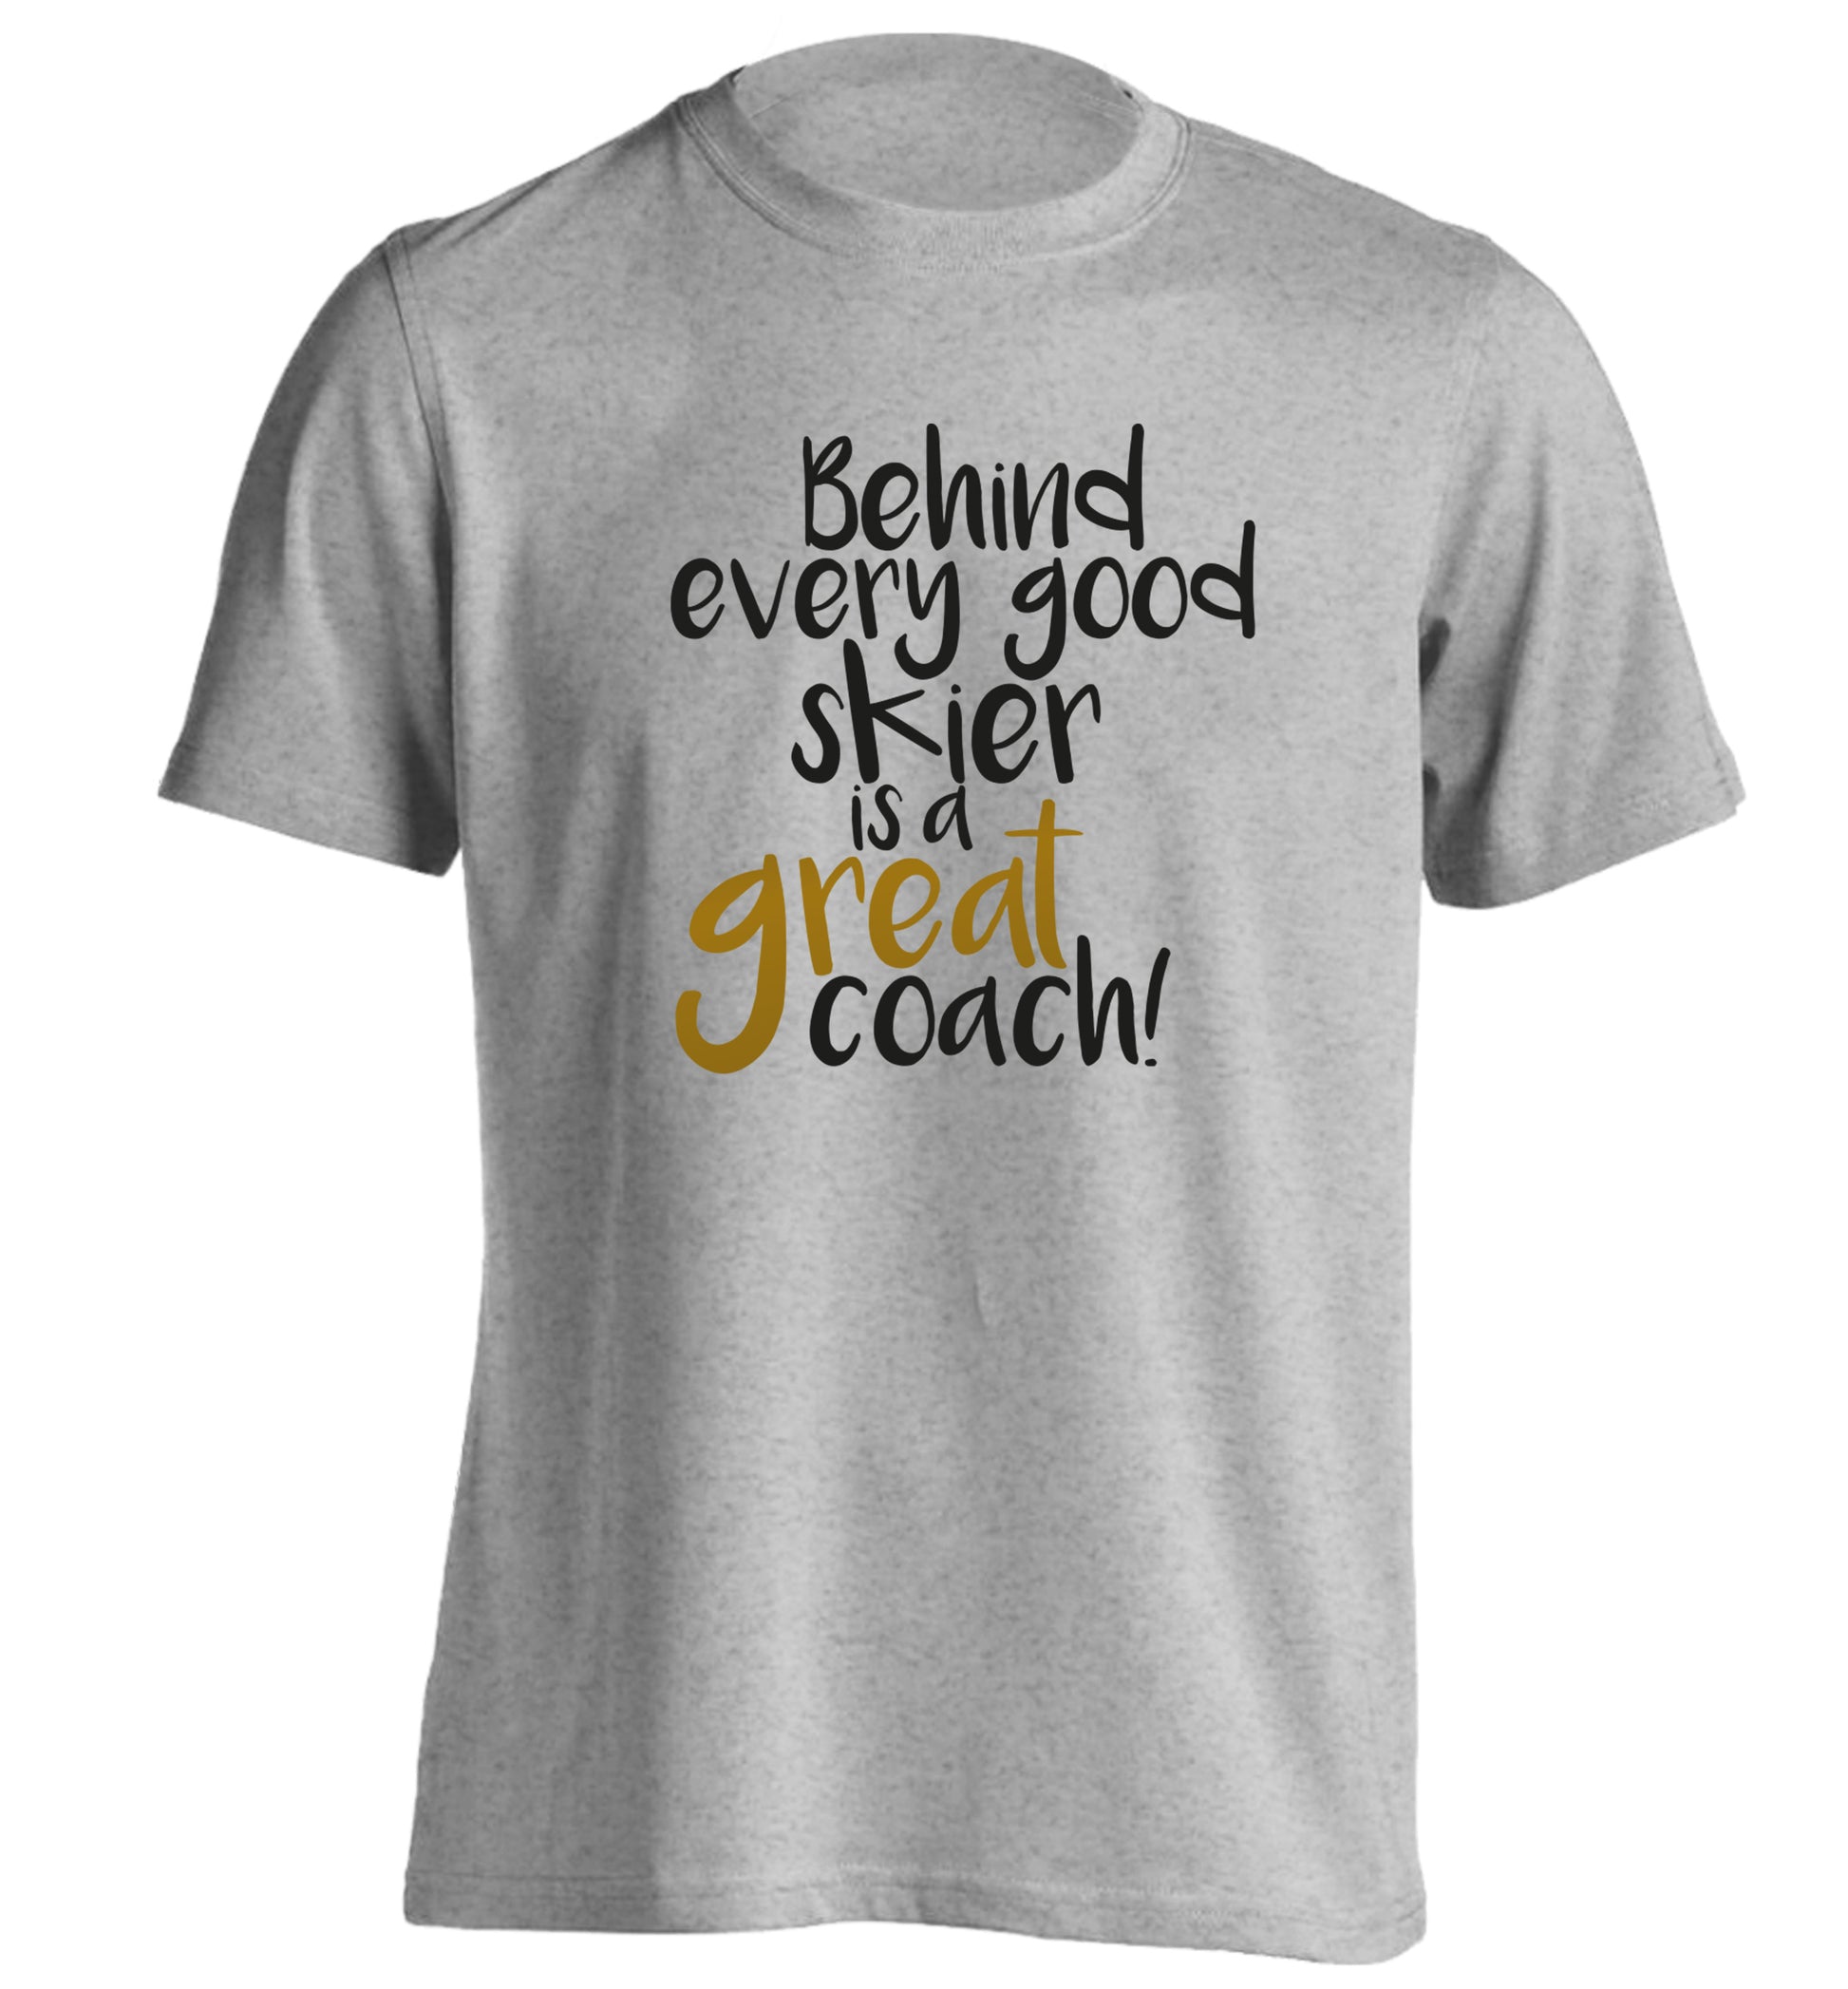 Behind every good skier is a great coach! adults unisexgrey Tshirt 2XL